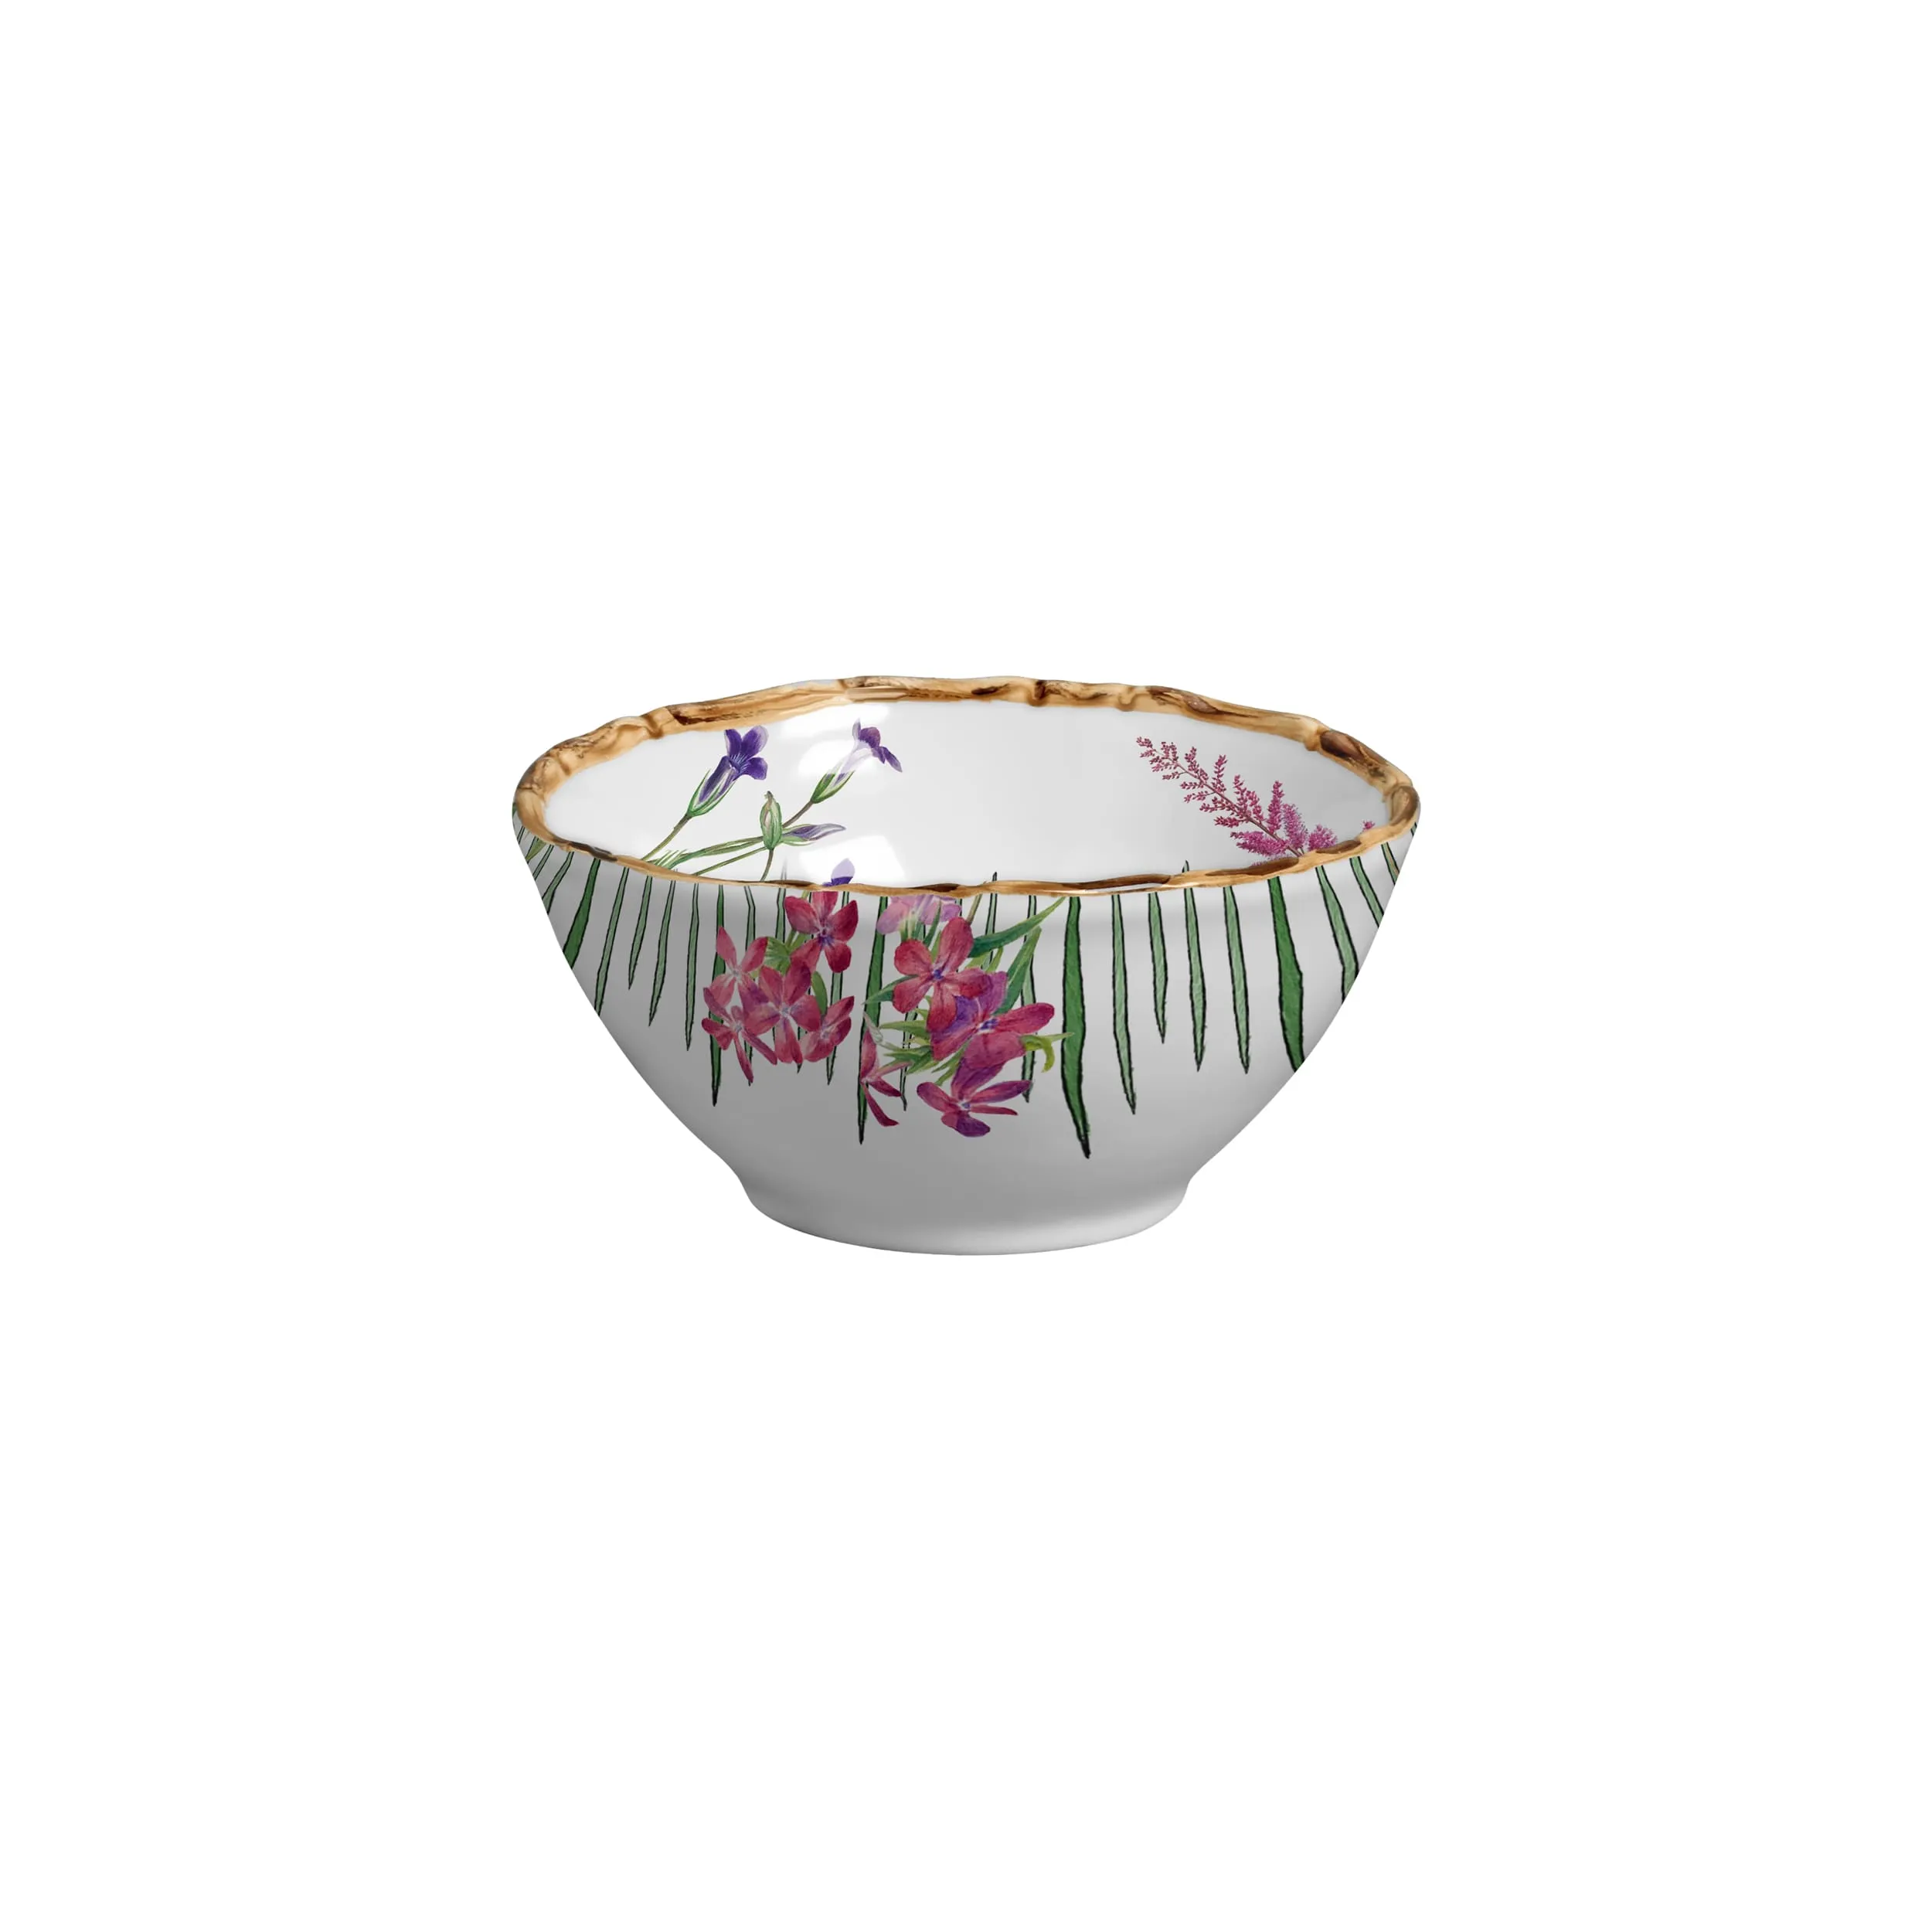 BOWL CEREAL WILD FLOWERS - Linha Wild Flowers - 